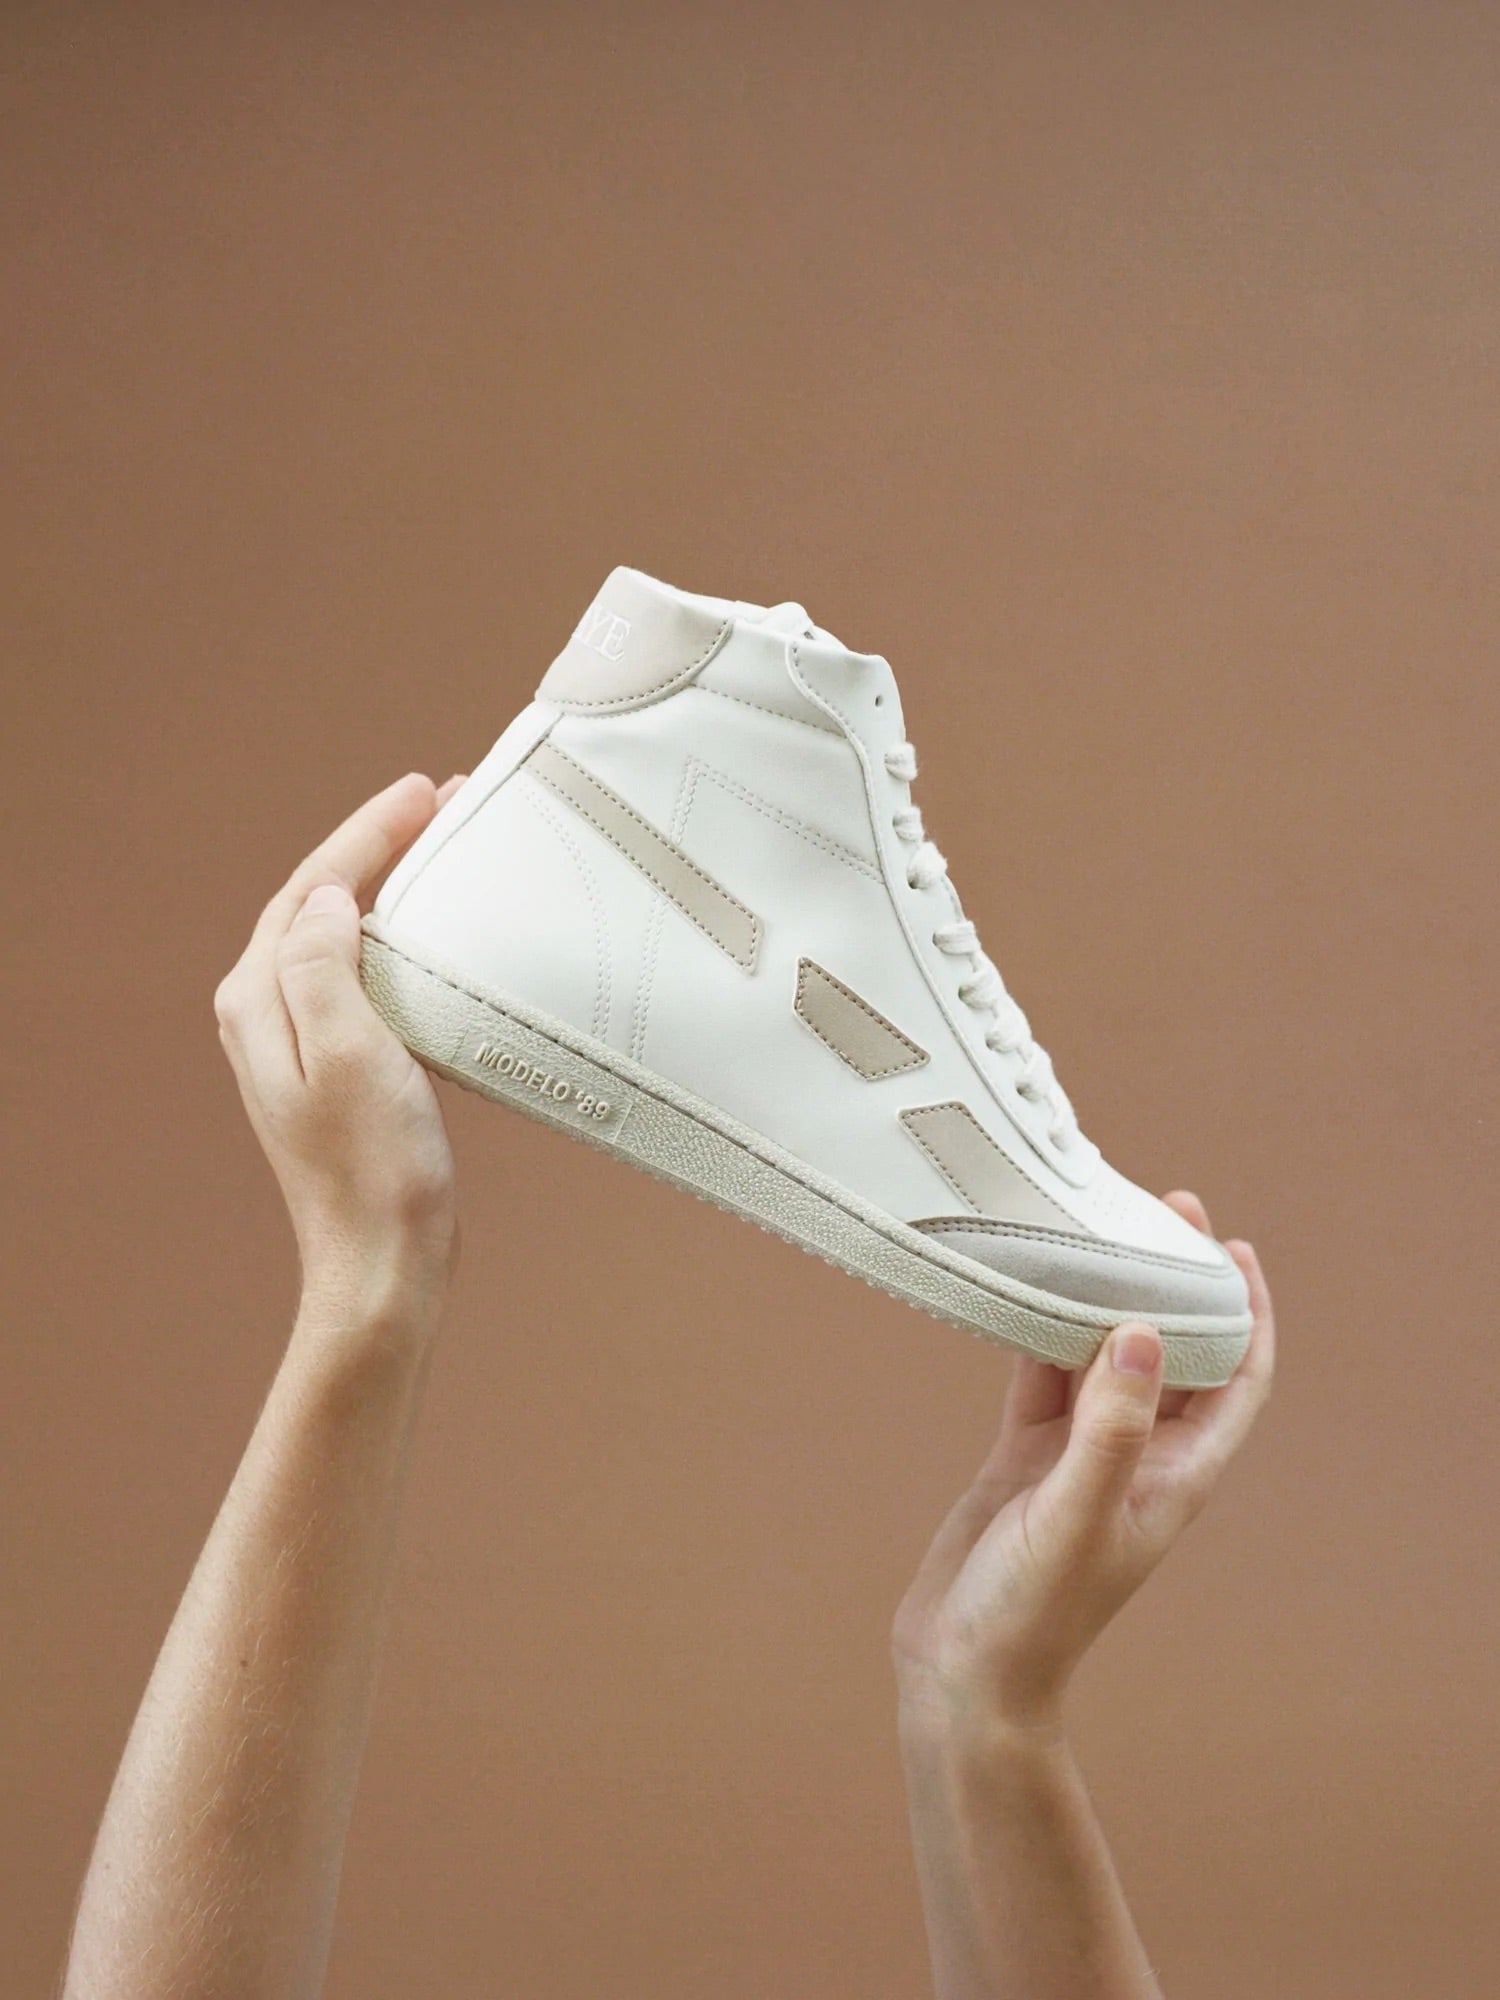 A pair of hands holding up a SAYE Modelo '89 Hi Sneaker - Beige made from bio-based vegan leather.